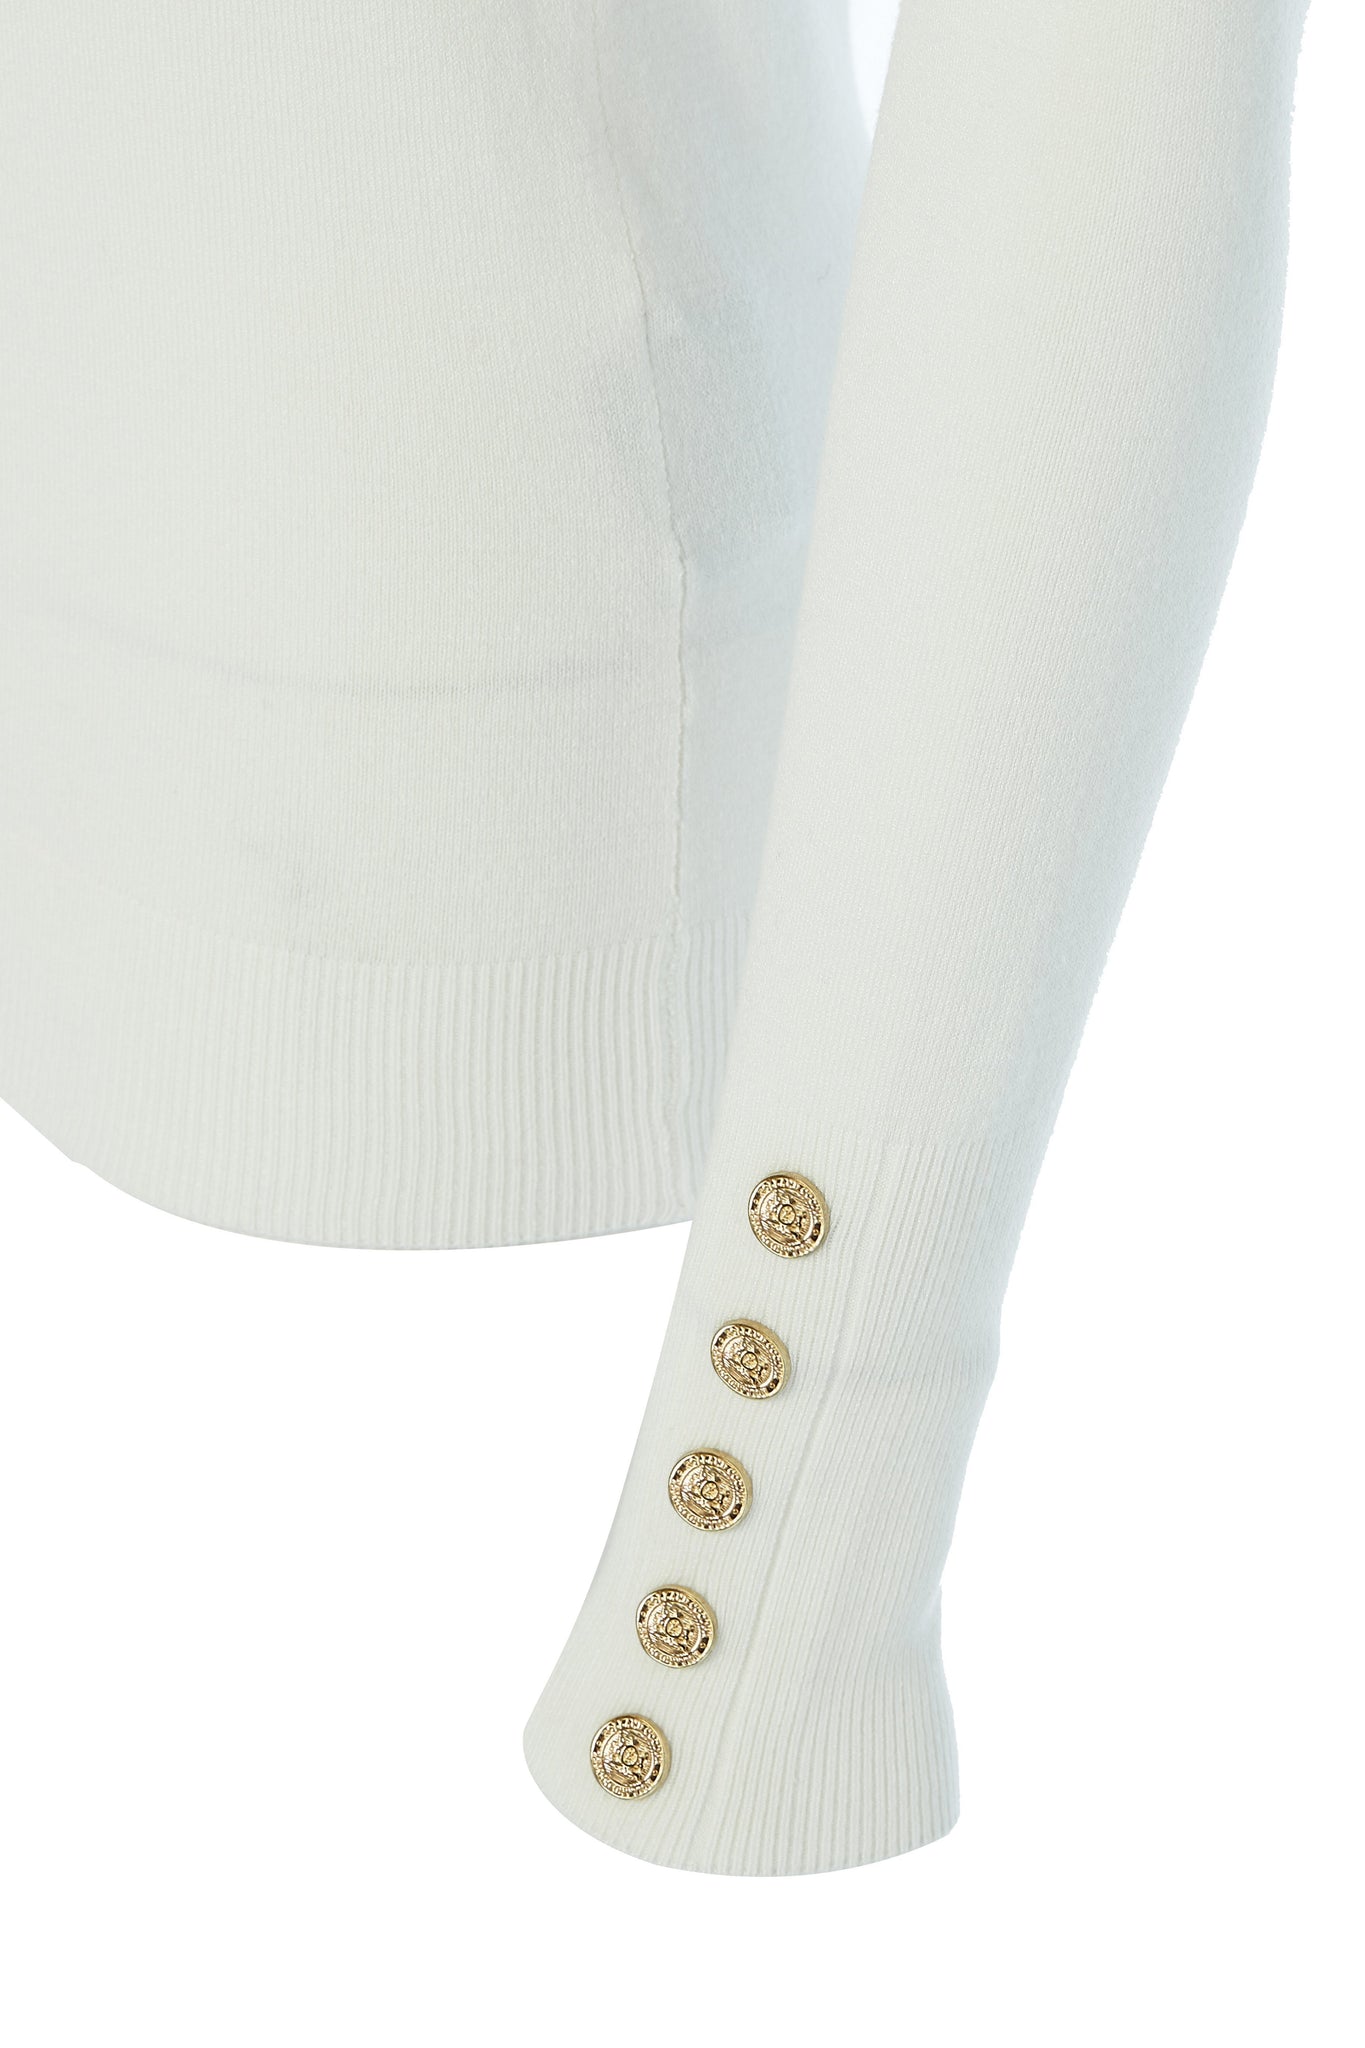 gold button detail on cuffs of super soft lightweight jumper in cream with ribbed roll neck collar, cuffs and hem